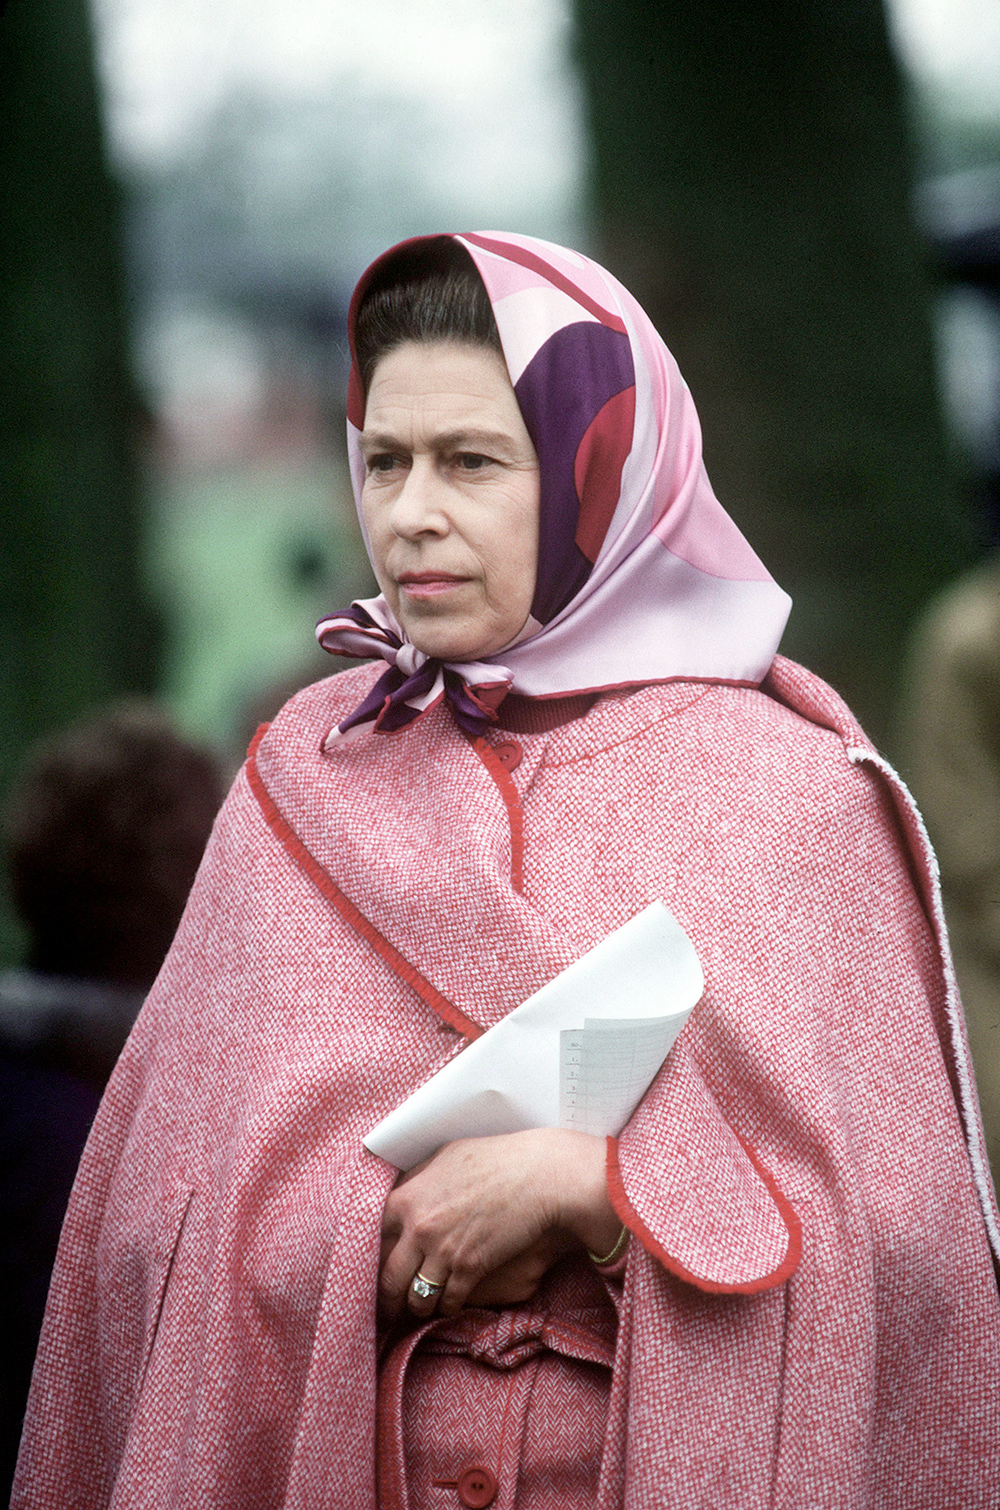 A cape coat and graphic headscarf ensure the Queen is a standout at the Royal Windsor Horse Show in 1979. Photo / Getty Images